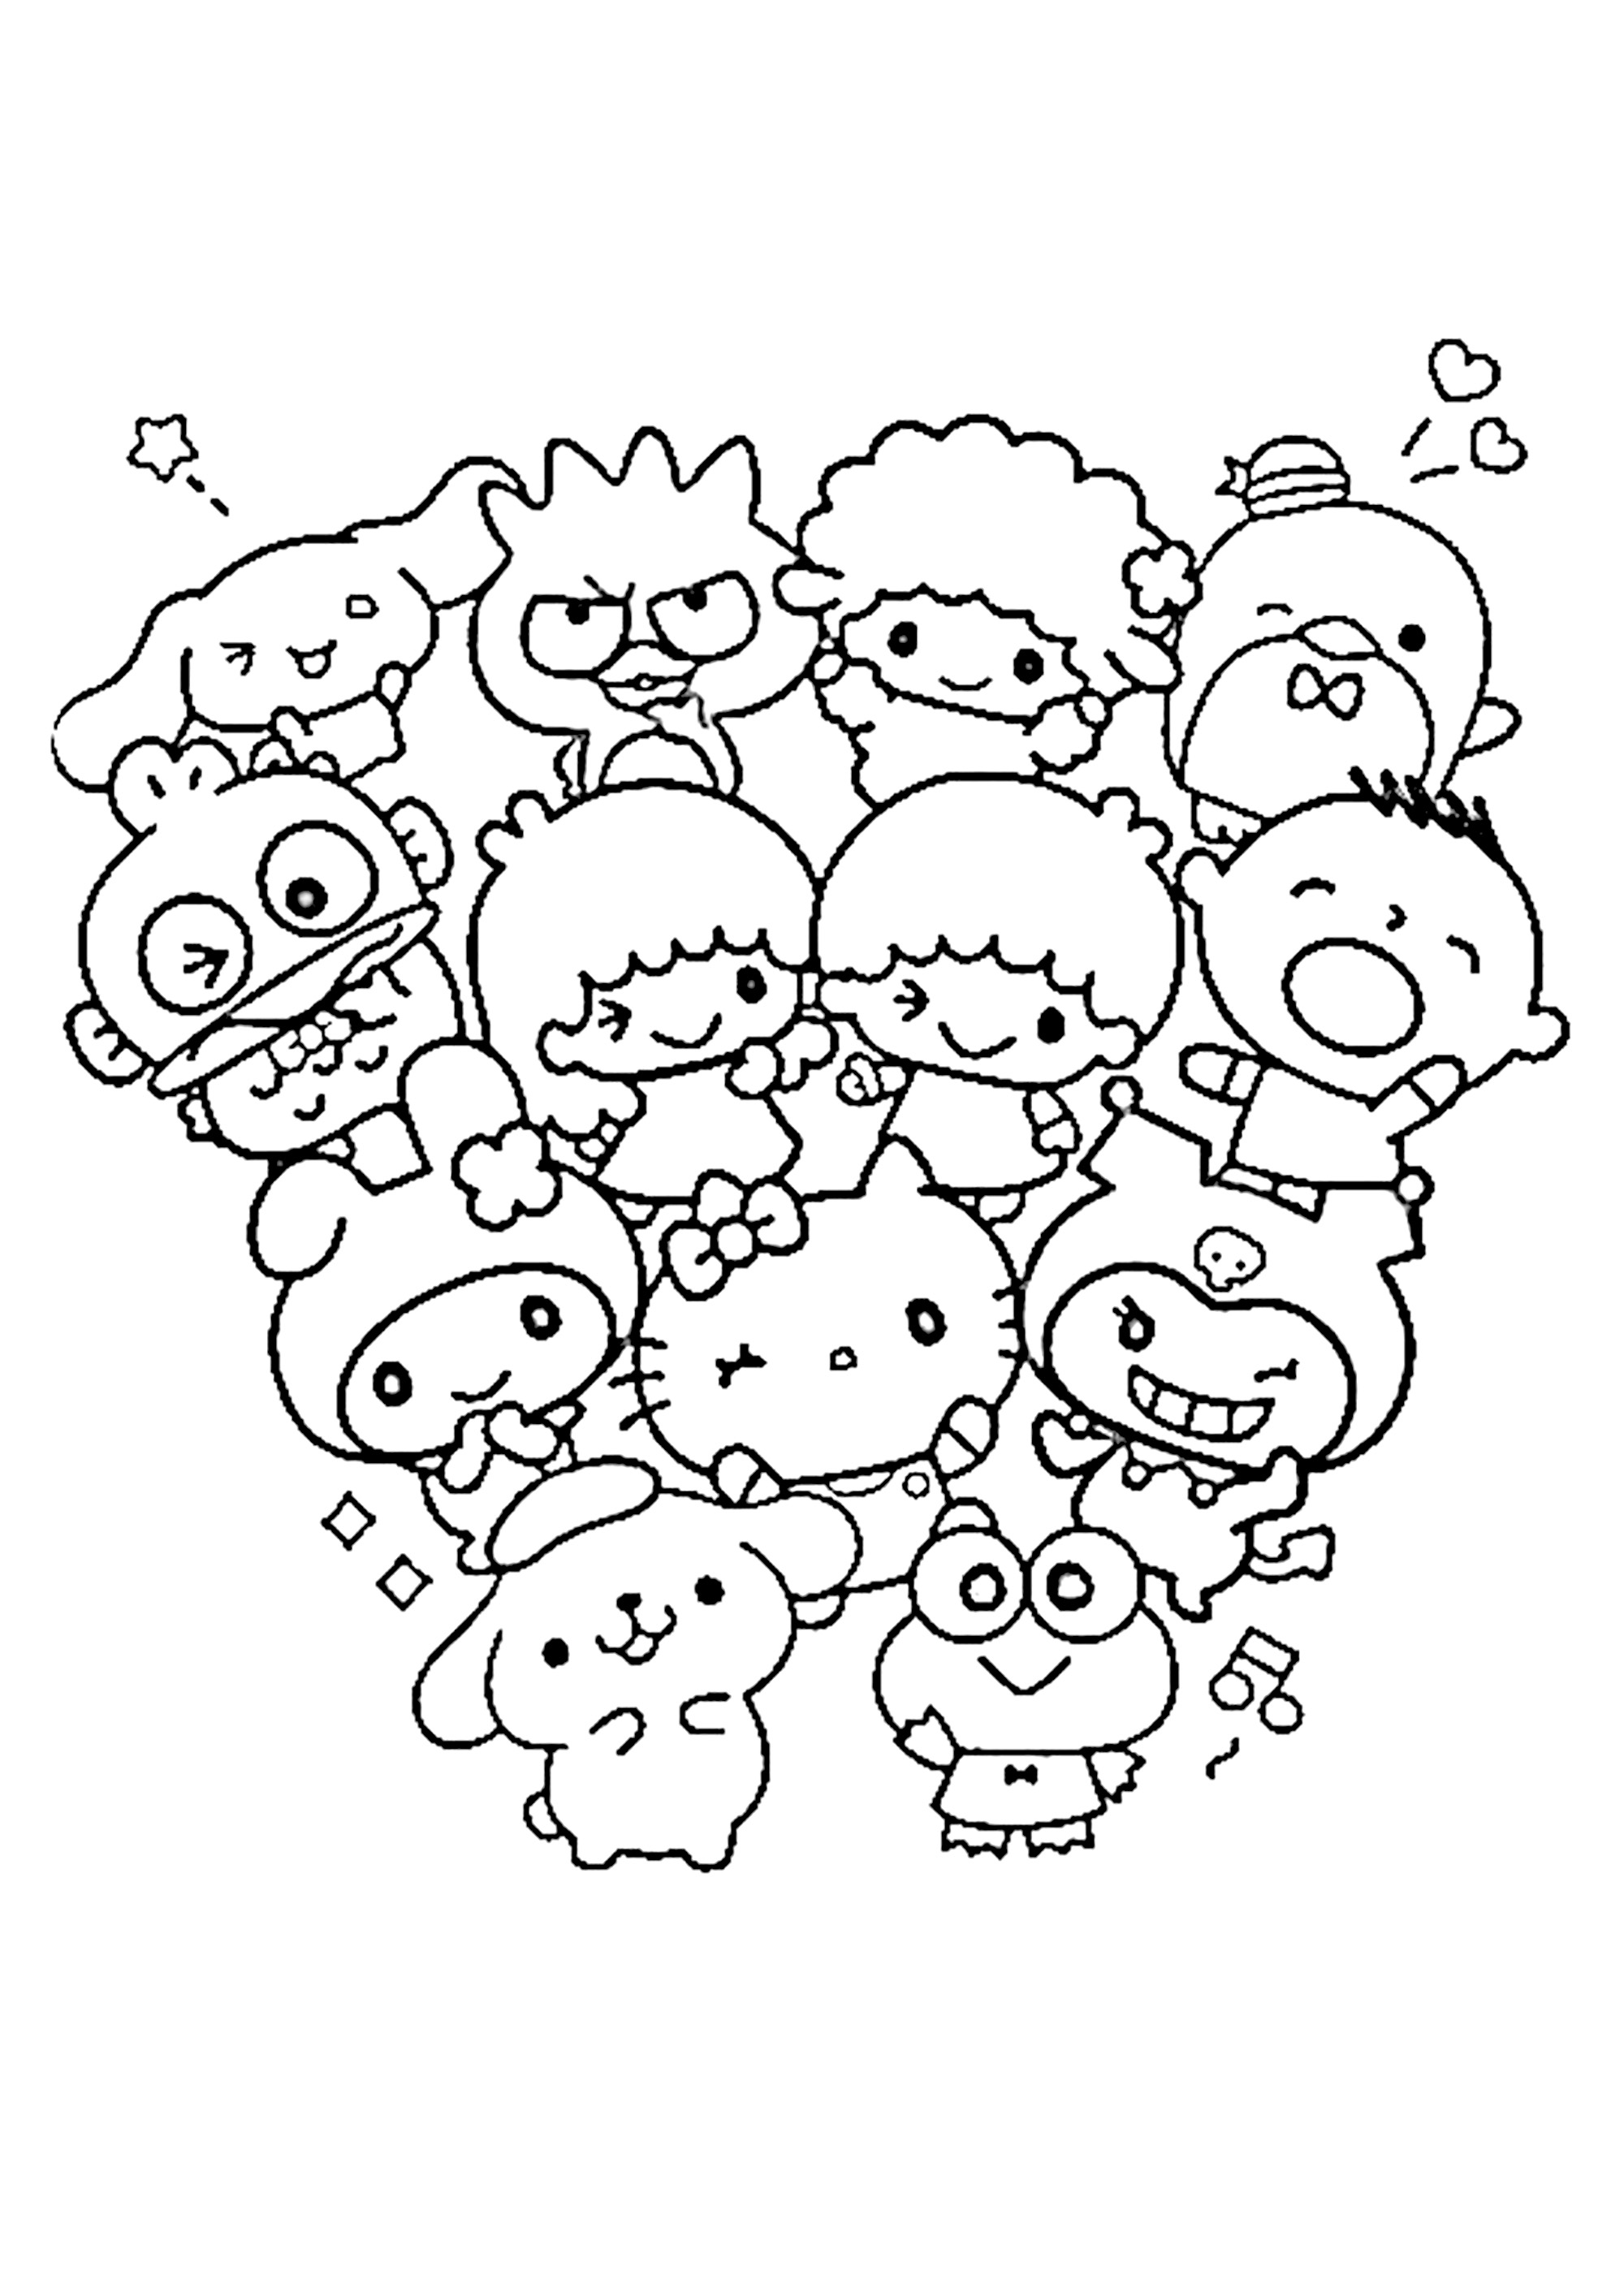 Sanrio's adorable creatures coloring pages. Find and color Hello Kitty, Kuromi, My Melody ...